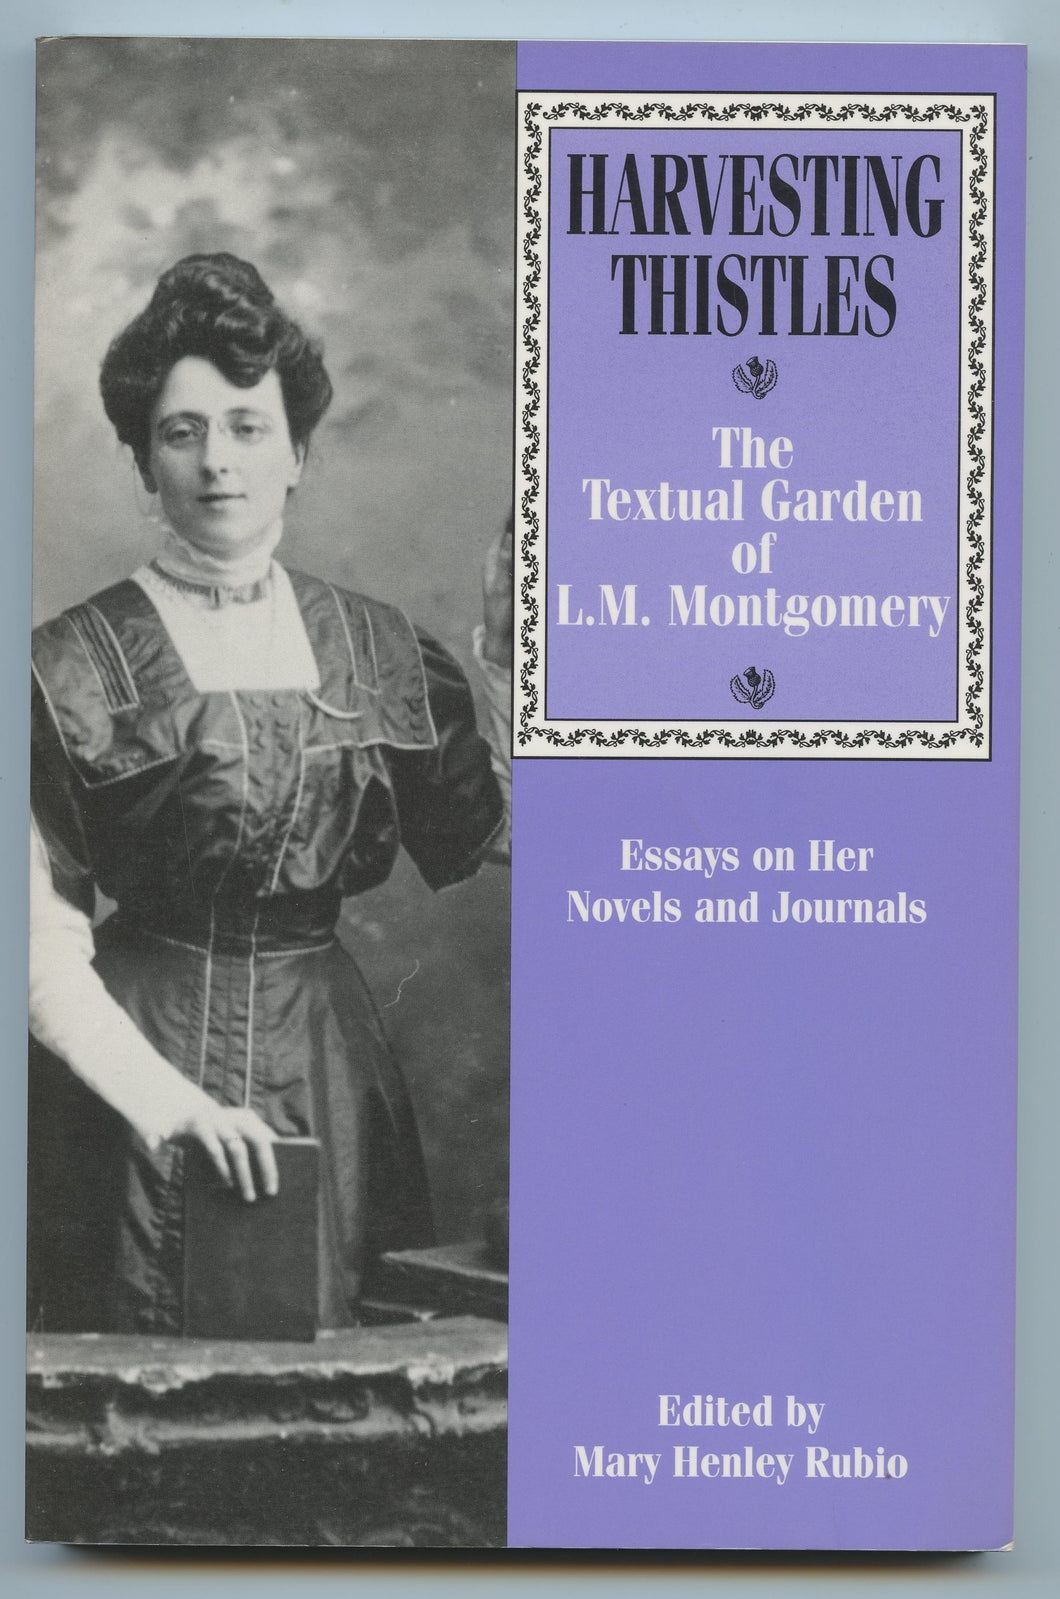 Harvesting Thistles: The Textual Garden of L. M. Montgomery